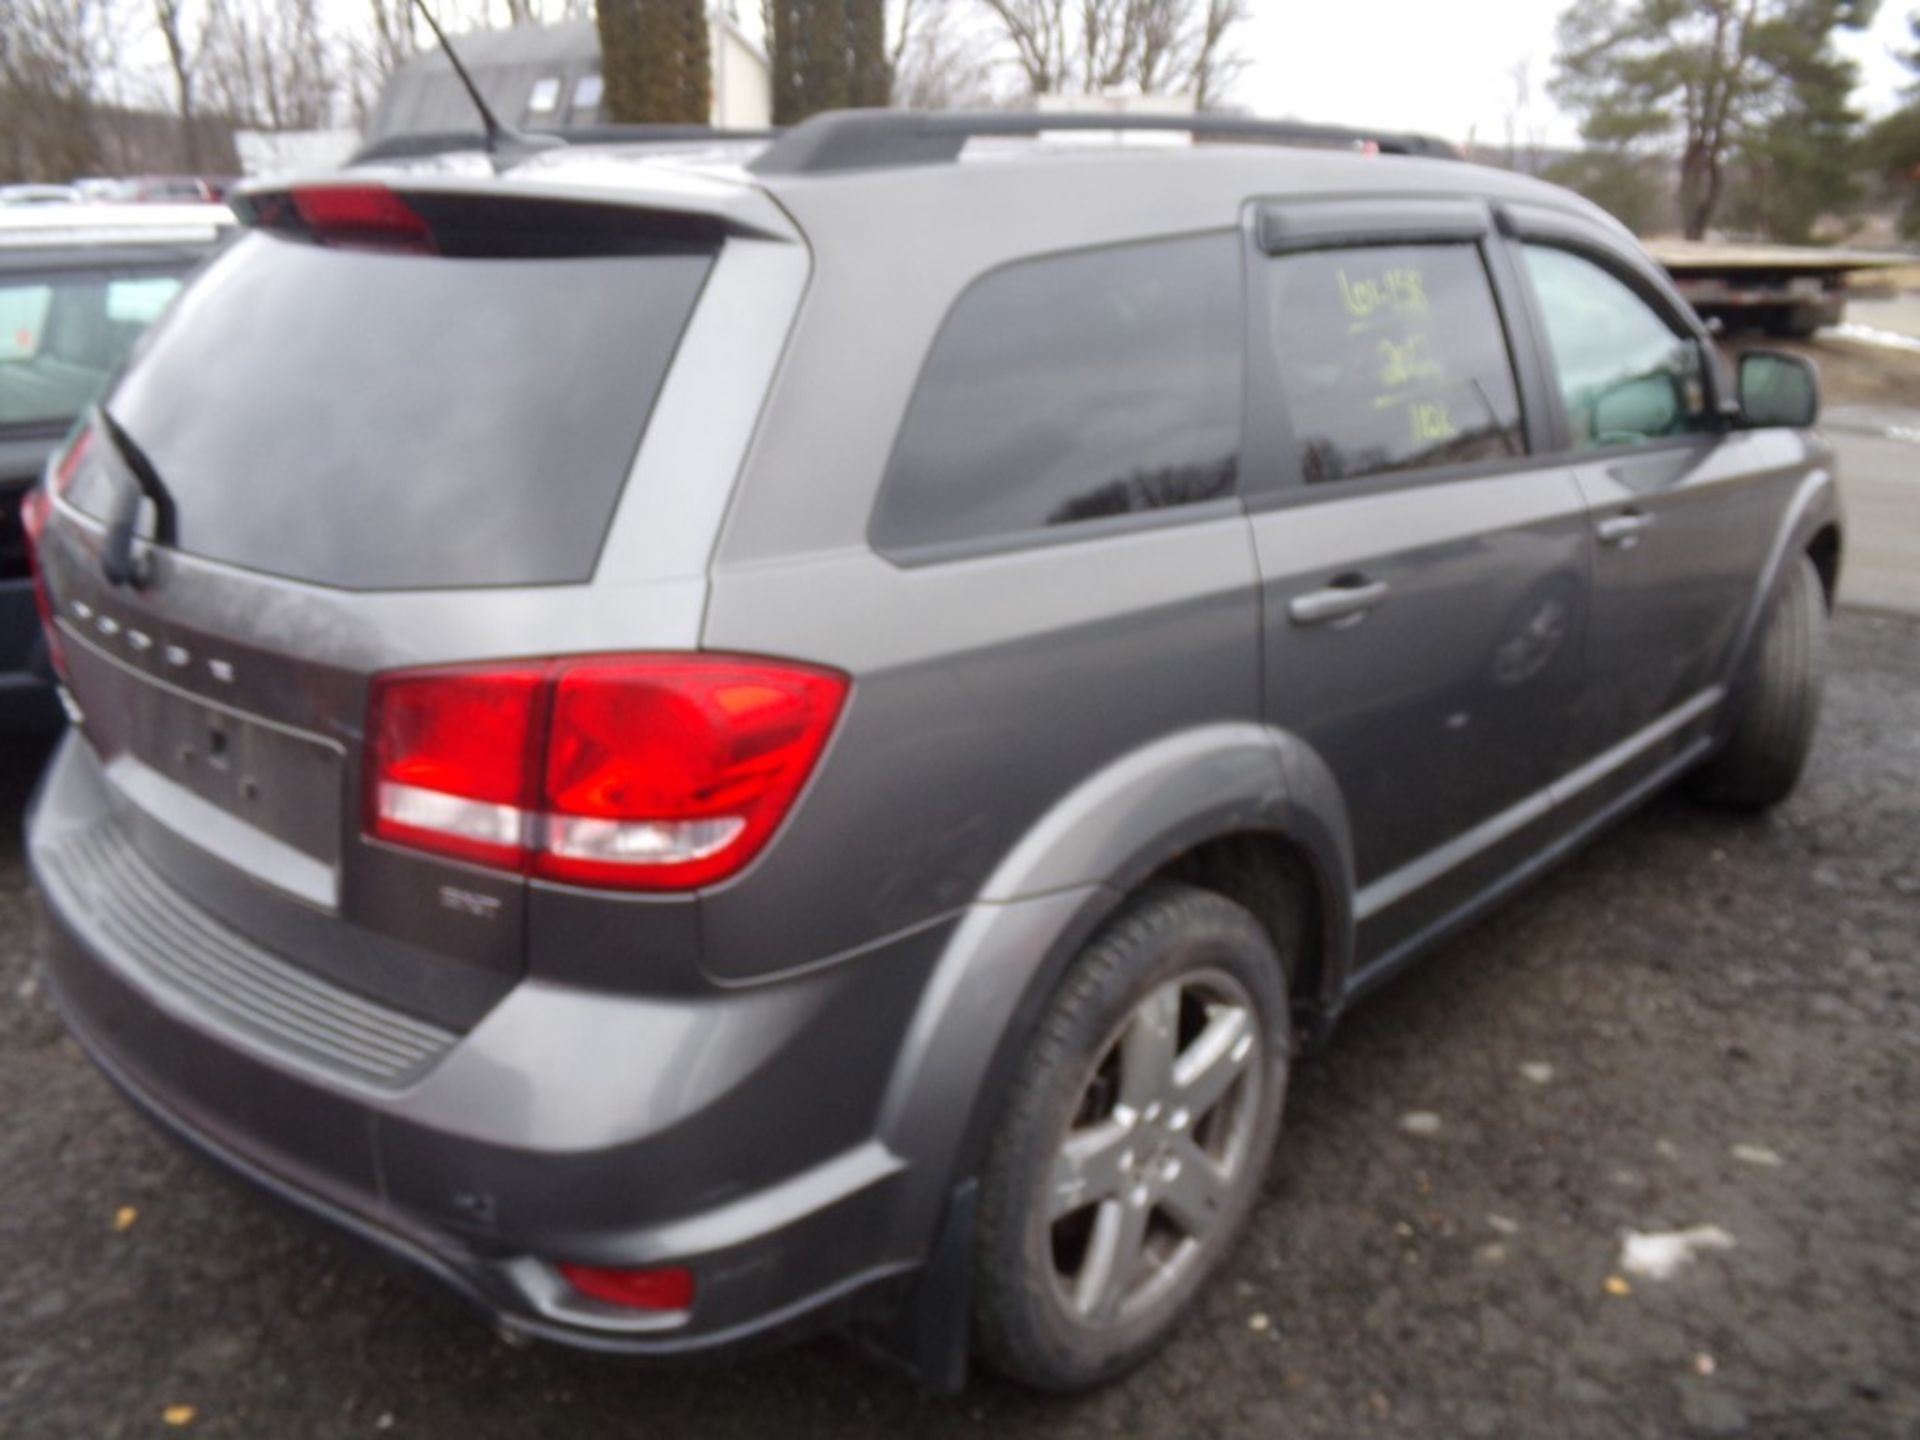 2012 Dodge Journey SXT, AWD, Grey, 3rd Row Seating, 110,543 Miles, VIN#: 3C4PDDBG9CT397588 - OPEN TO - Image 3 of 4